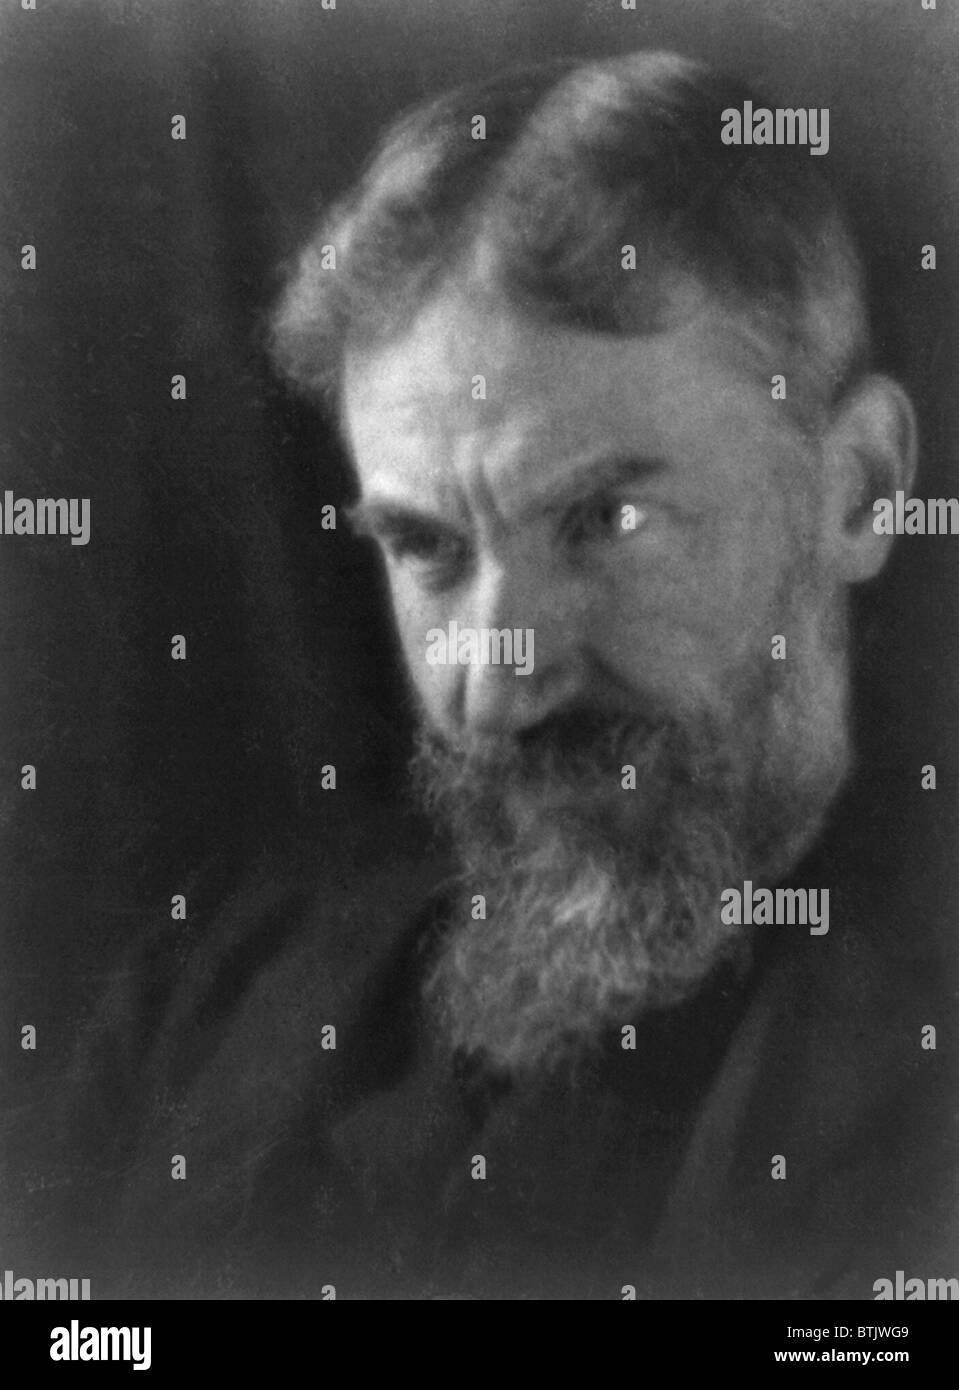 George Bernard Shaw (1856-1950), Irish-English playwright, combined social ideas and criticism with realistic characters and comedy, and is among the first authentic 20th century English dramatists of enduring popularity. Pictorialist portrait by Alvin Langdon Coburn ca. 1905. Stock Photo